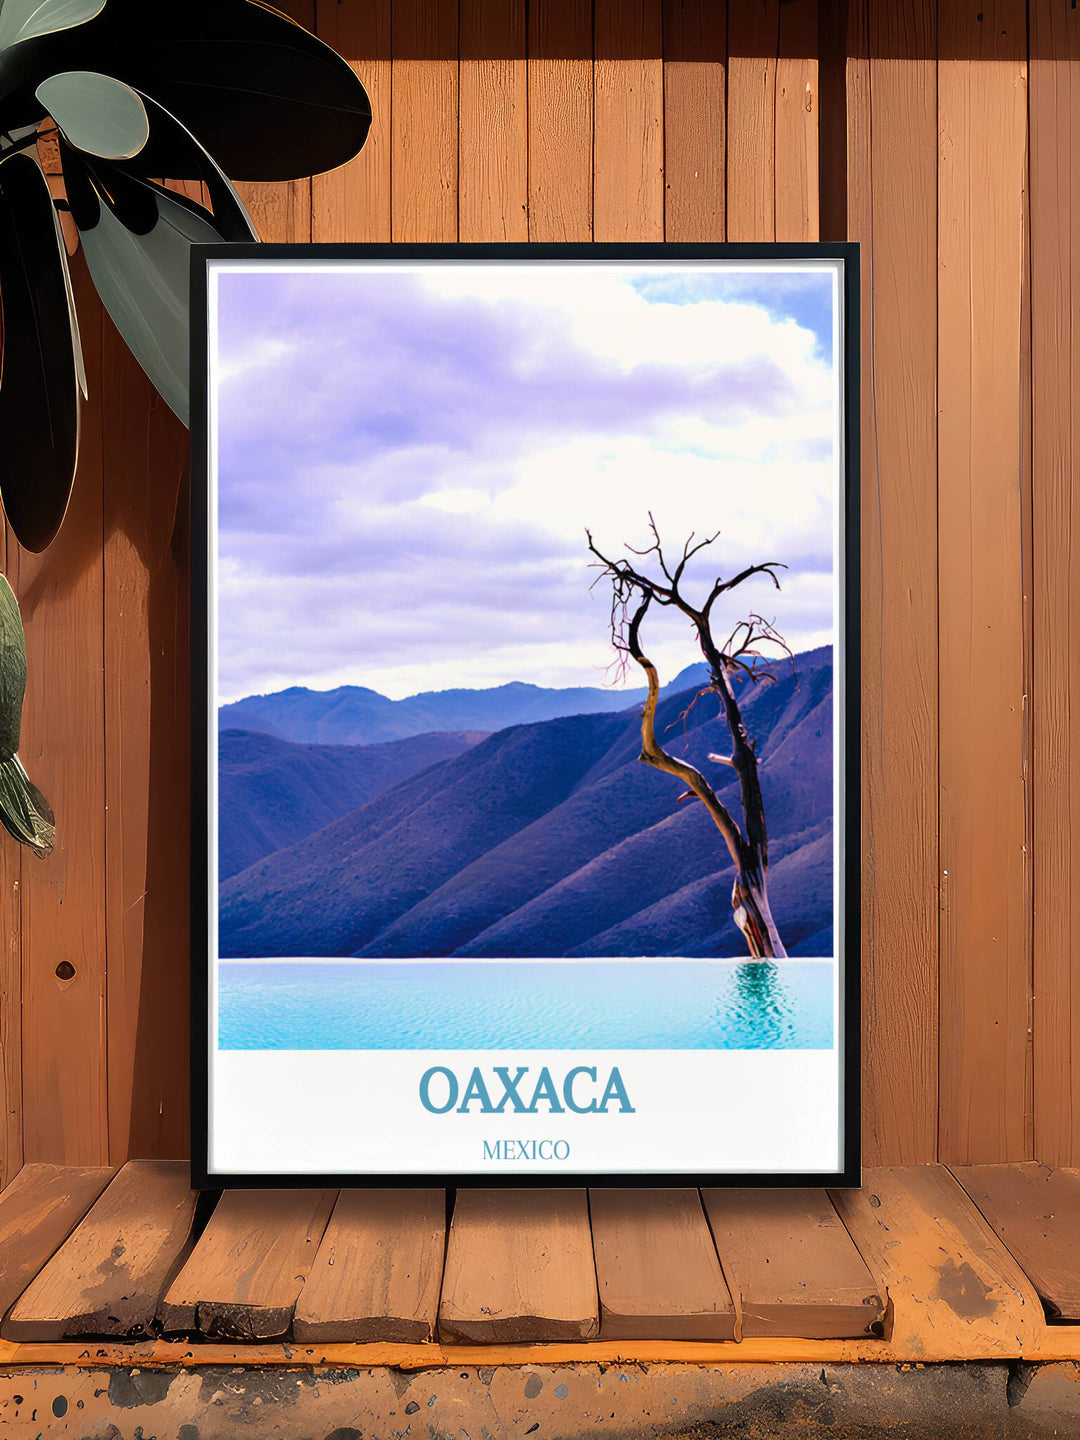 Fine art print of Hierve el Agua, a natural wonder in Oaxaca, designed to bring a piece of Mexico into your home.